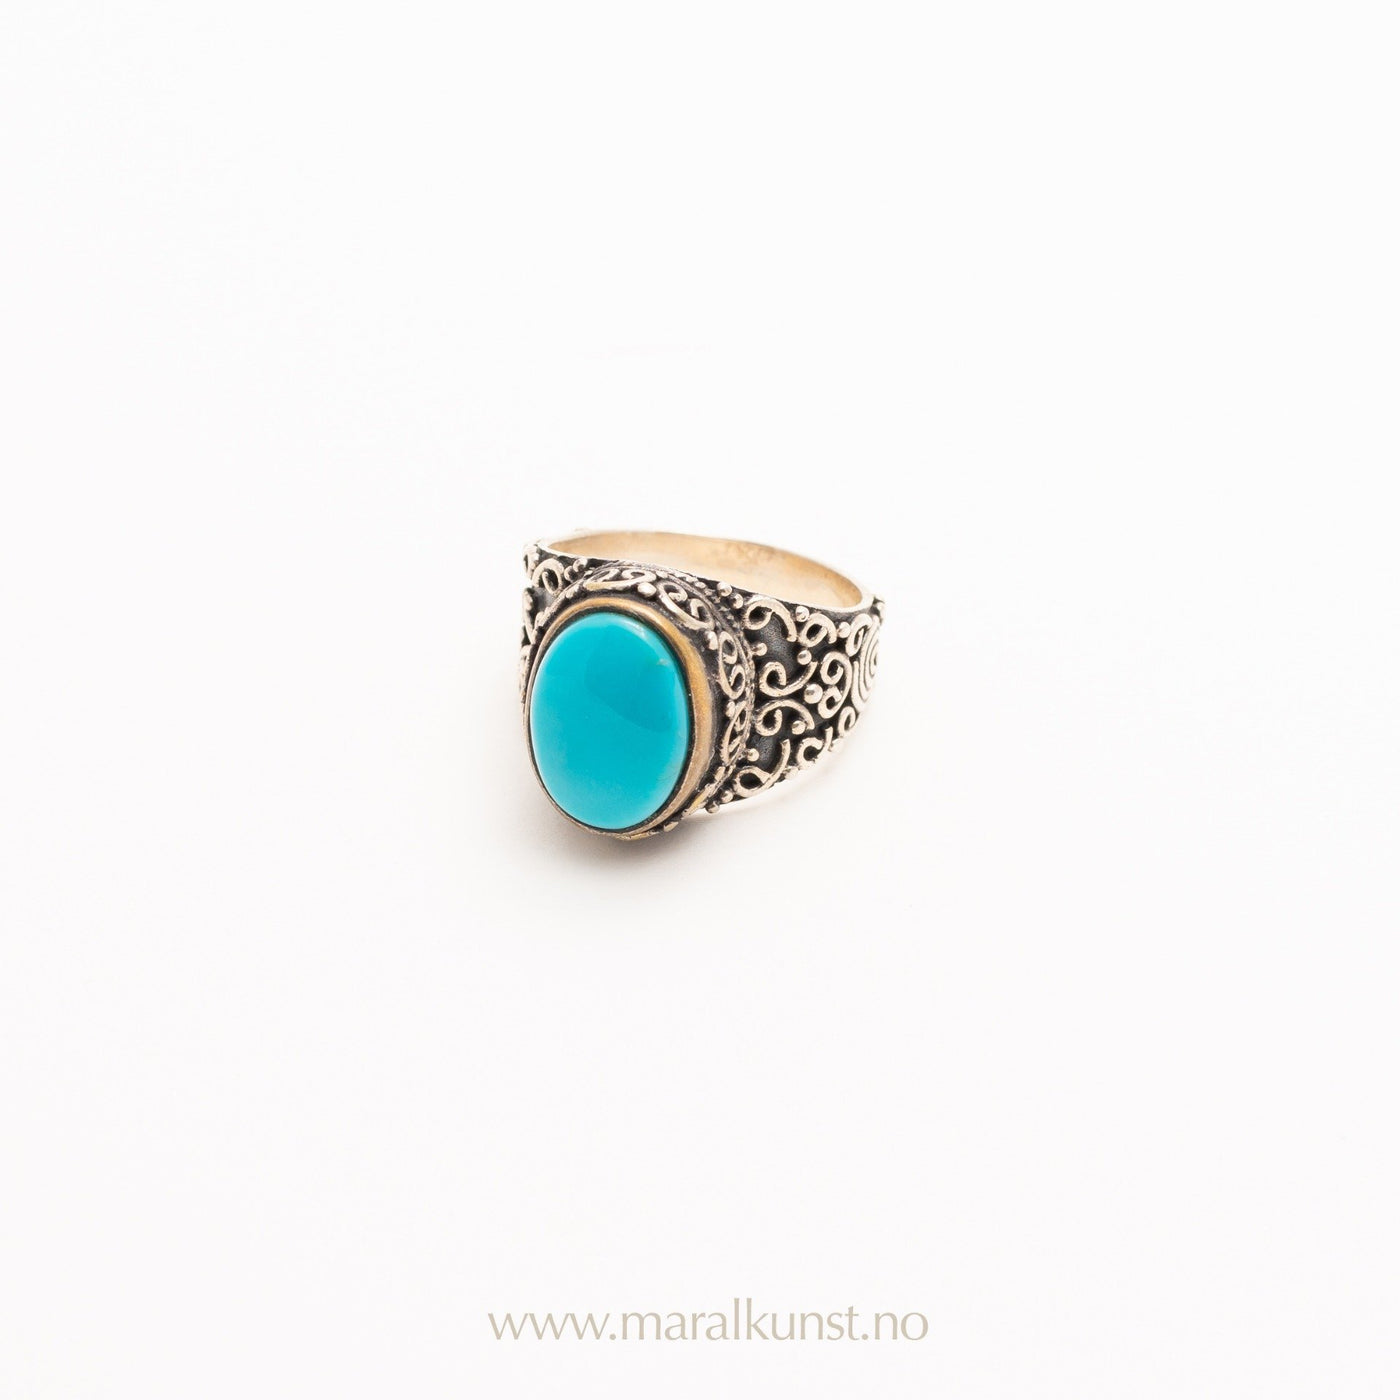 Turquoise Gemstone Ring in Gold - Maral Kunst Jewelry